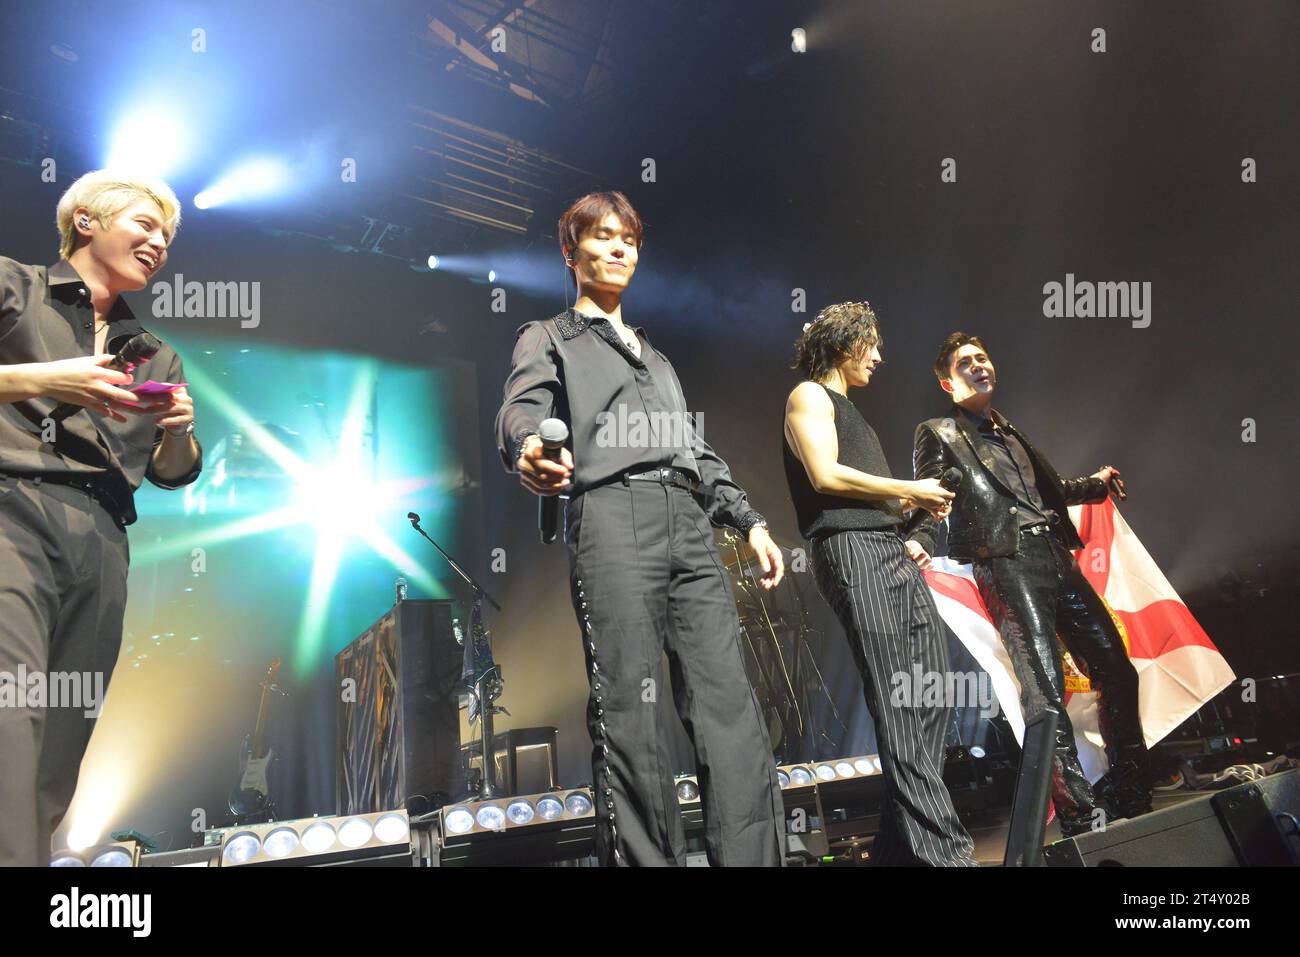 MIAMI , FLORIDA - OCTOBER 31: Lee Jae-hyeong, Lee Ha-joon, Kim Woo-sung and Park Do-joon of Korean indie rock band THE ROSE perform live onstage during the Dawn to Dusk Tour at James L. Knight Center on October 31, 2023 in Miami, Florida. Copyright: xmpi10x Stock Photo